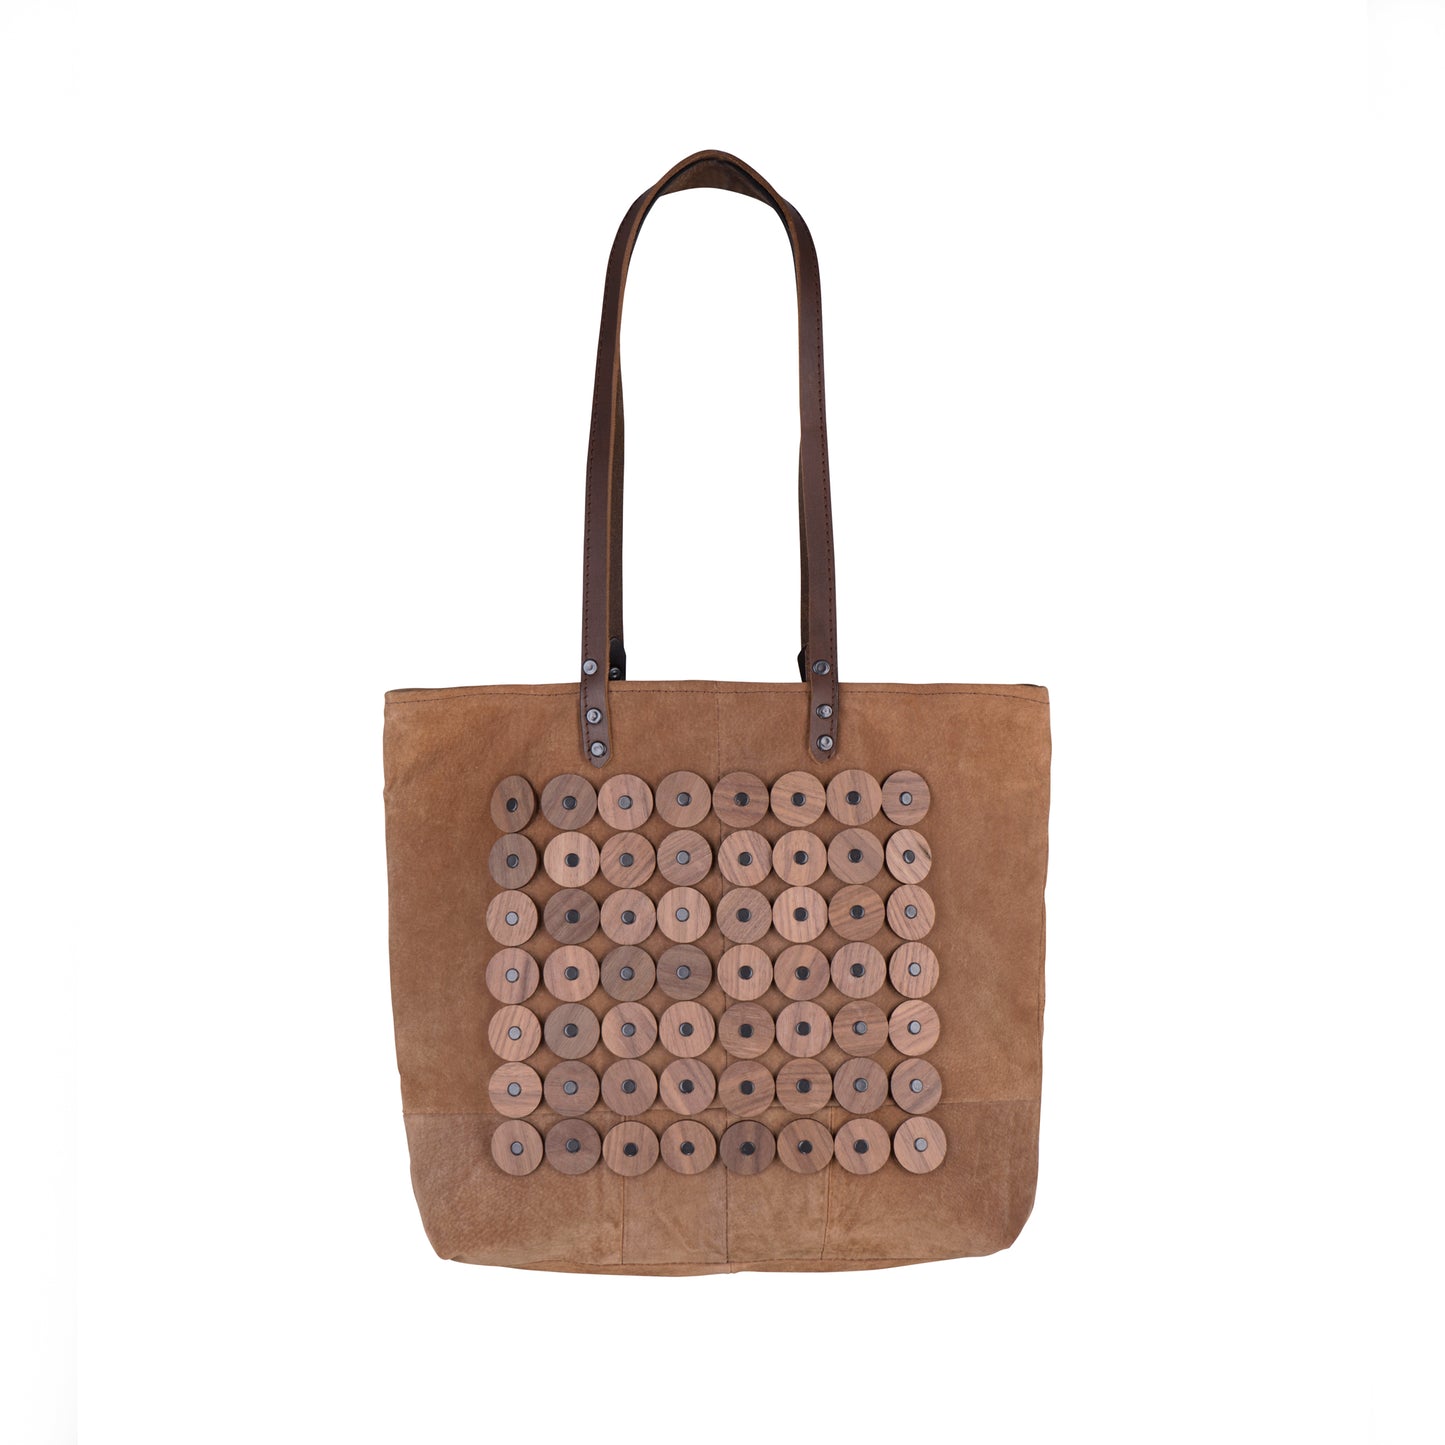 METANoIA light tan recycled leather medium handbag with circle bamboo and walnut forms fashioned into a repetitive fashion with a smaller circle overlay on each form. 